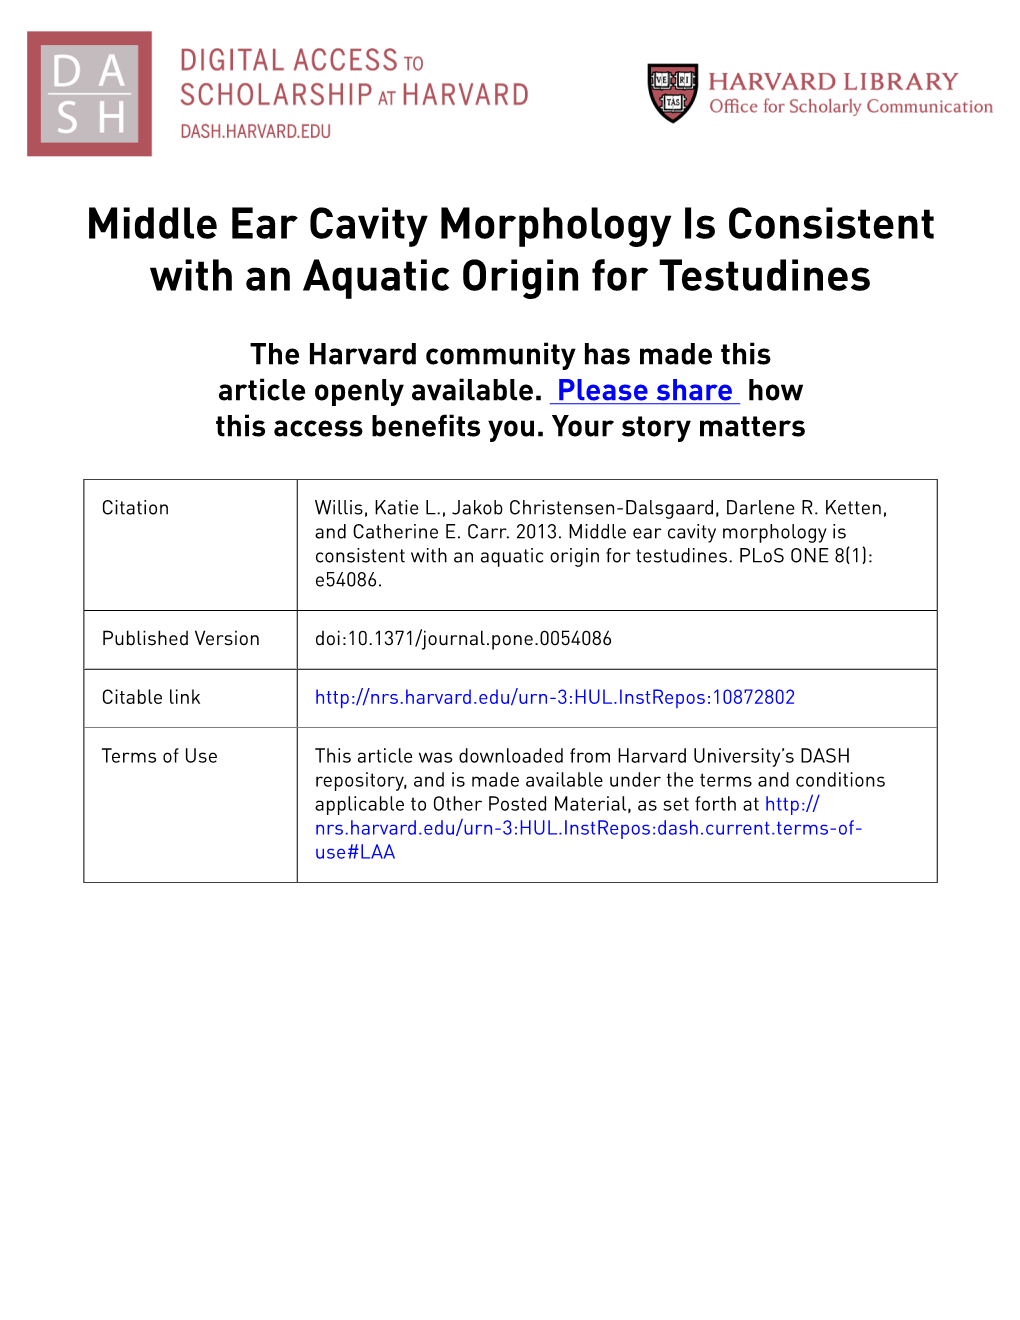 Middle Ear Cavity Morphology Is Consistent with an Aquatic Origin for Testudines